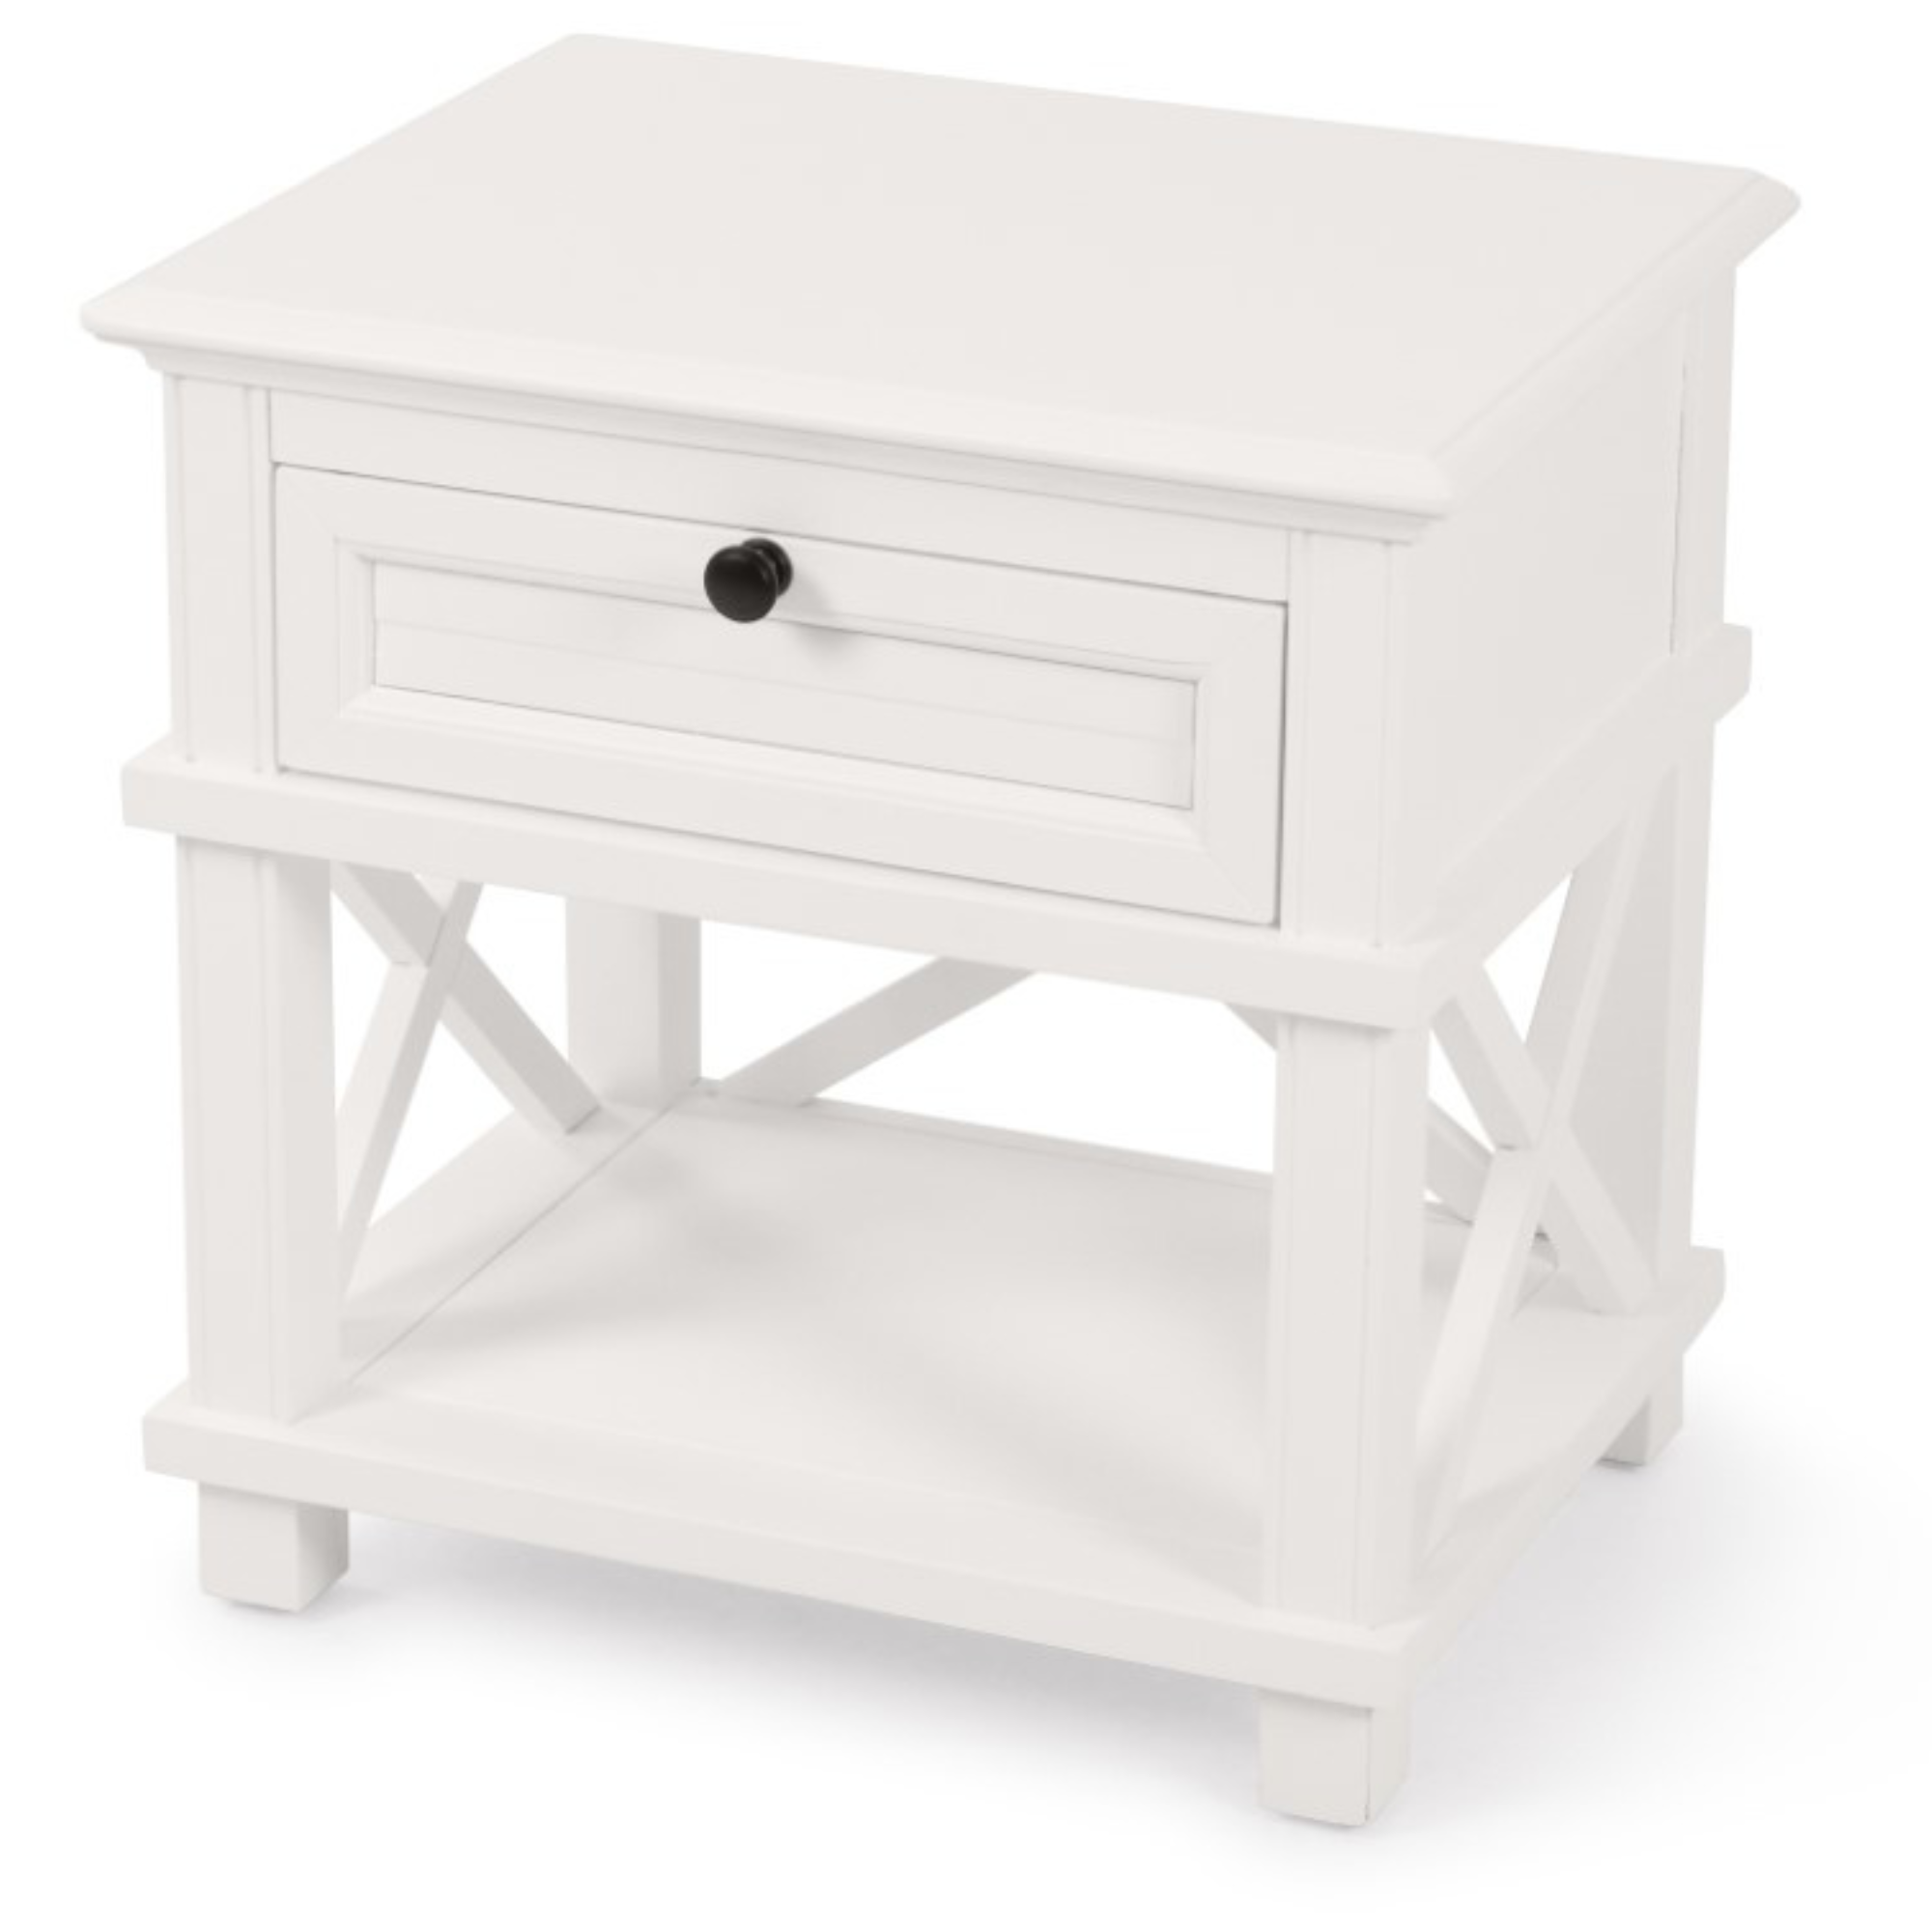 SINTRA HAMPTON STYLE BEDSIDE CABINET WITH DRAWER & SHELF